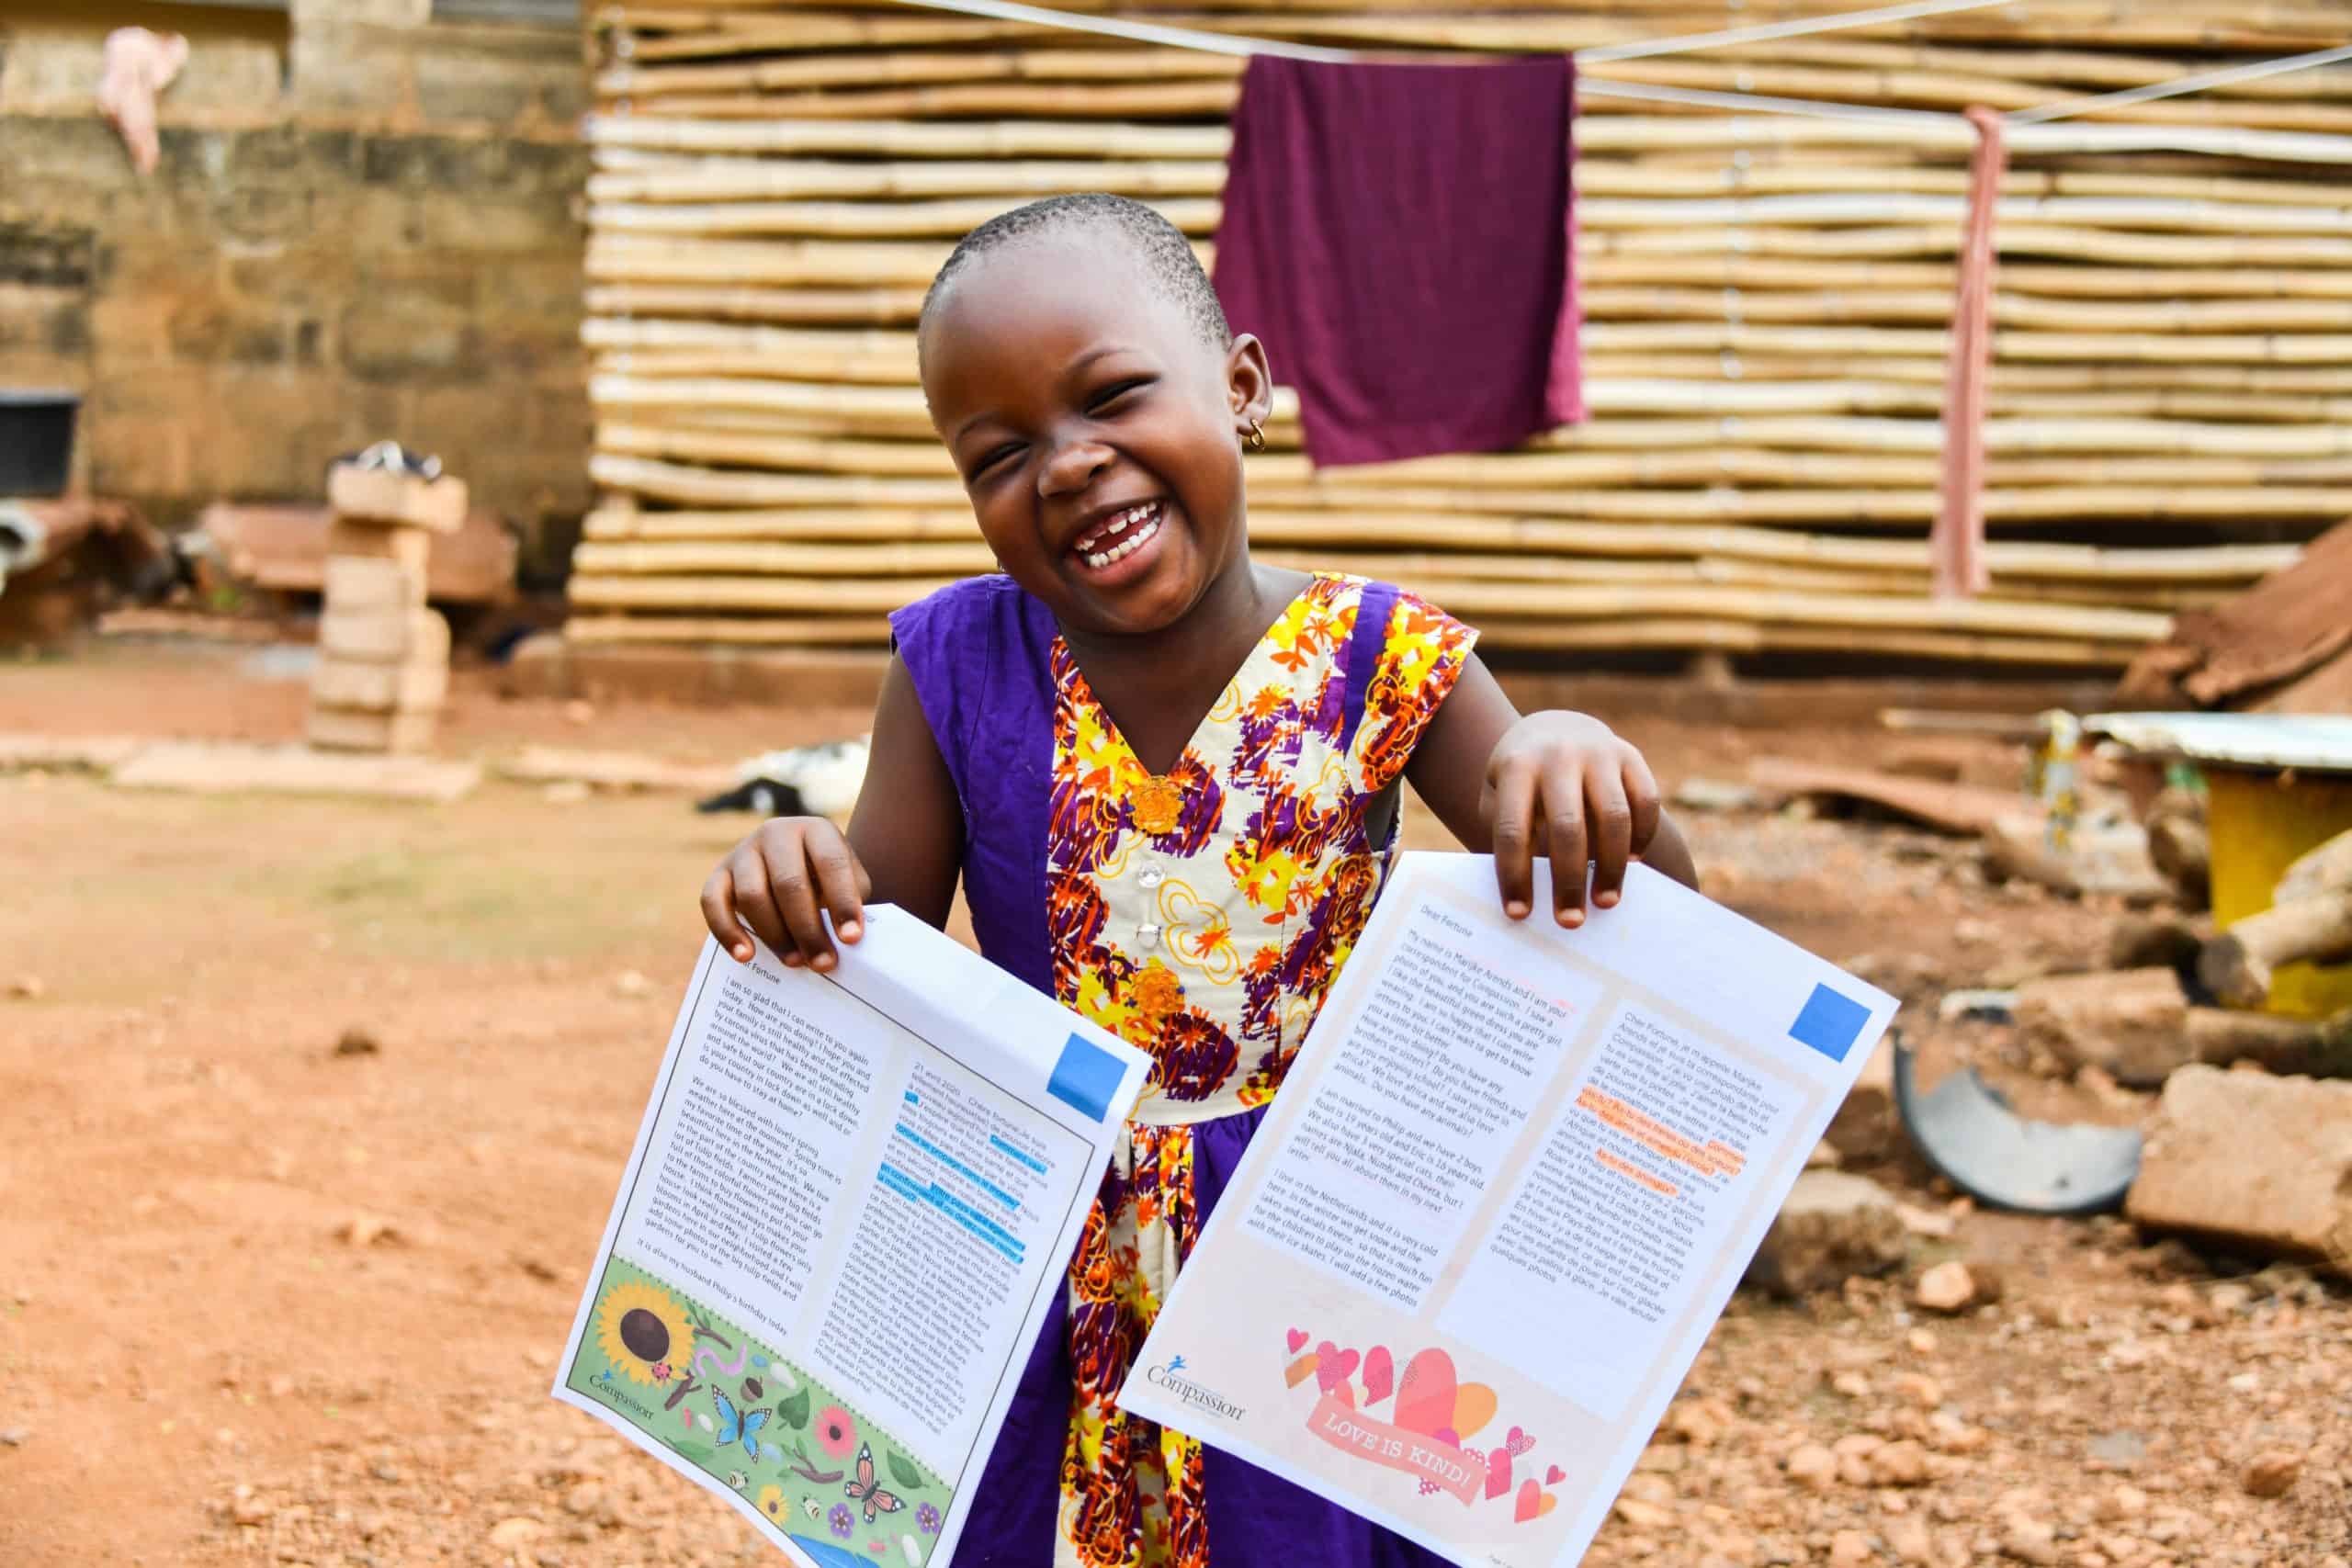 Fortune holds up letters from her sponsors. She is smiling and wearing a colorful dress.